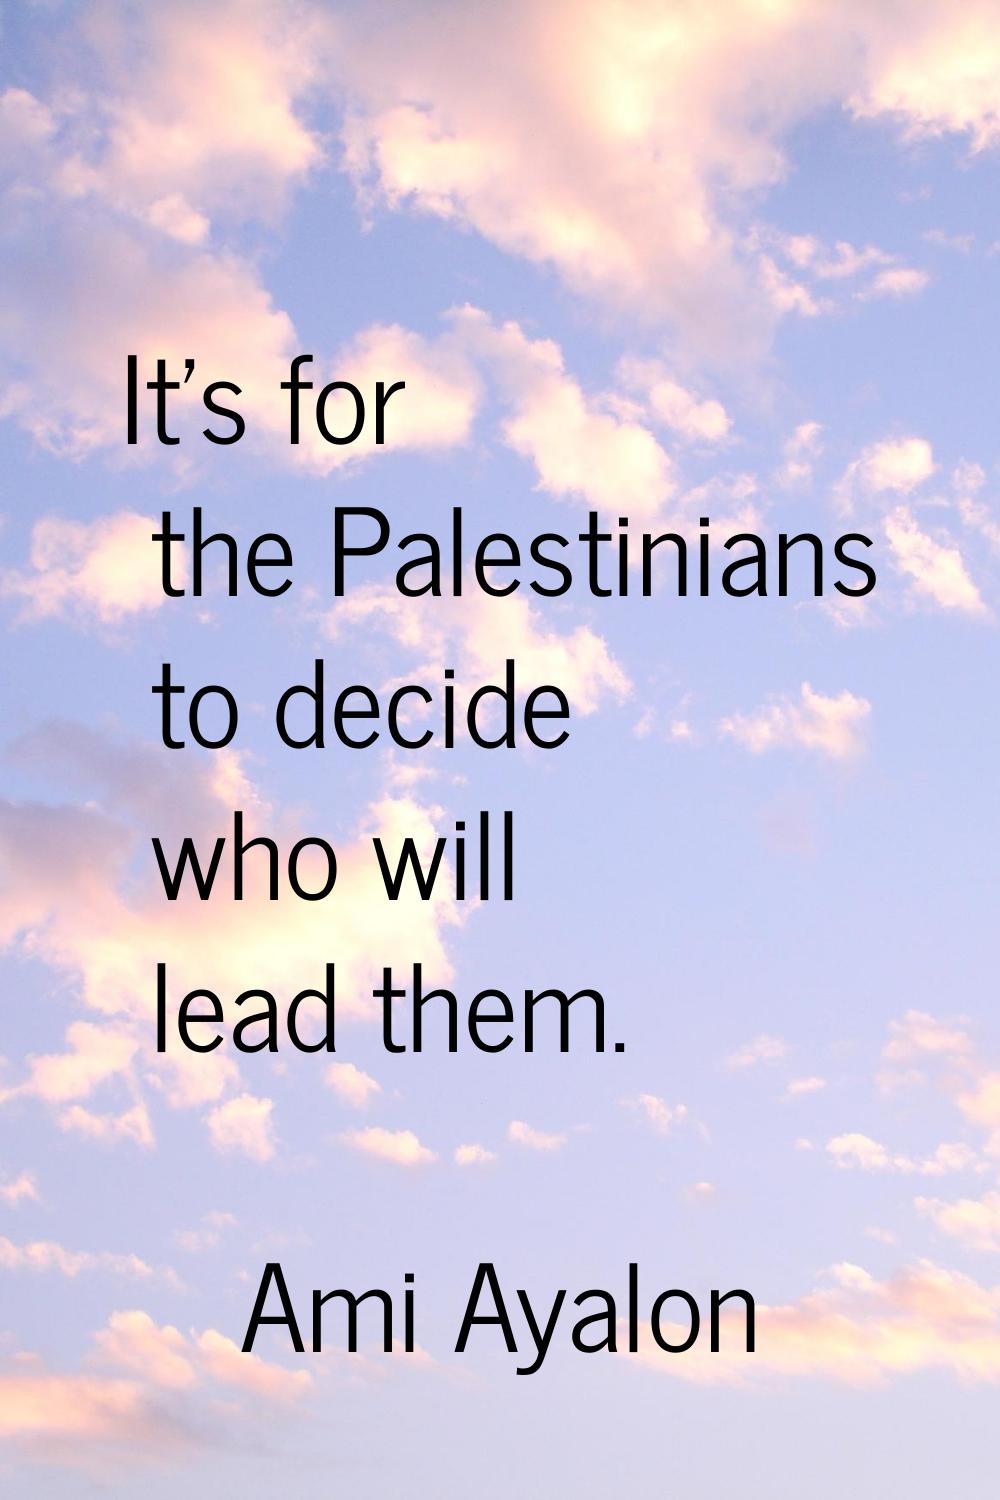 It's for the Palestinians to decide who will lead them.